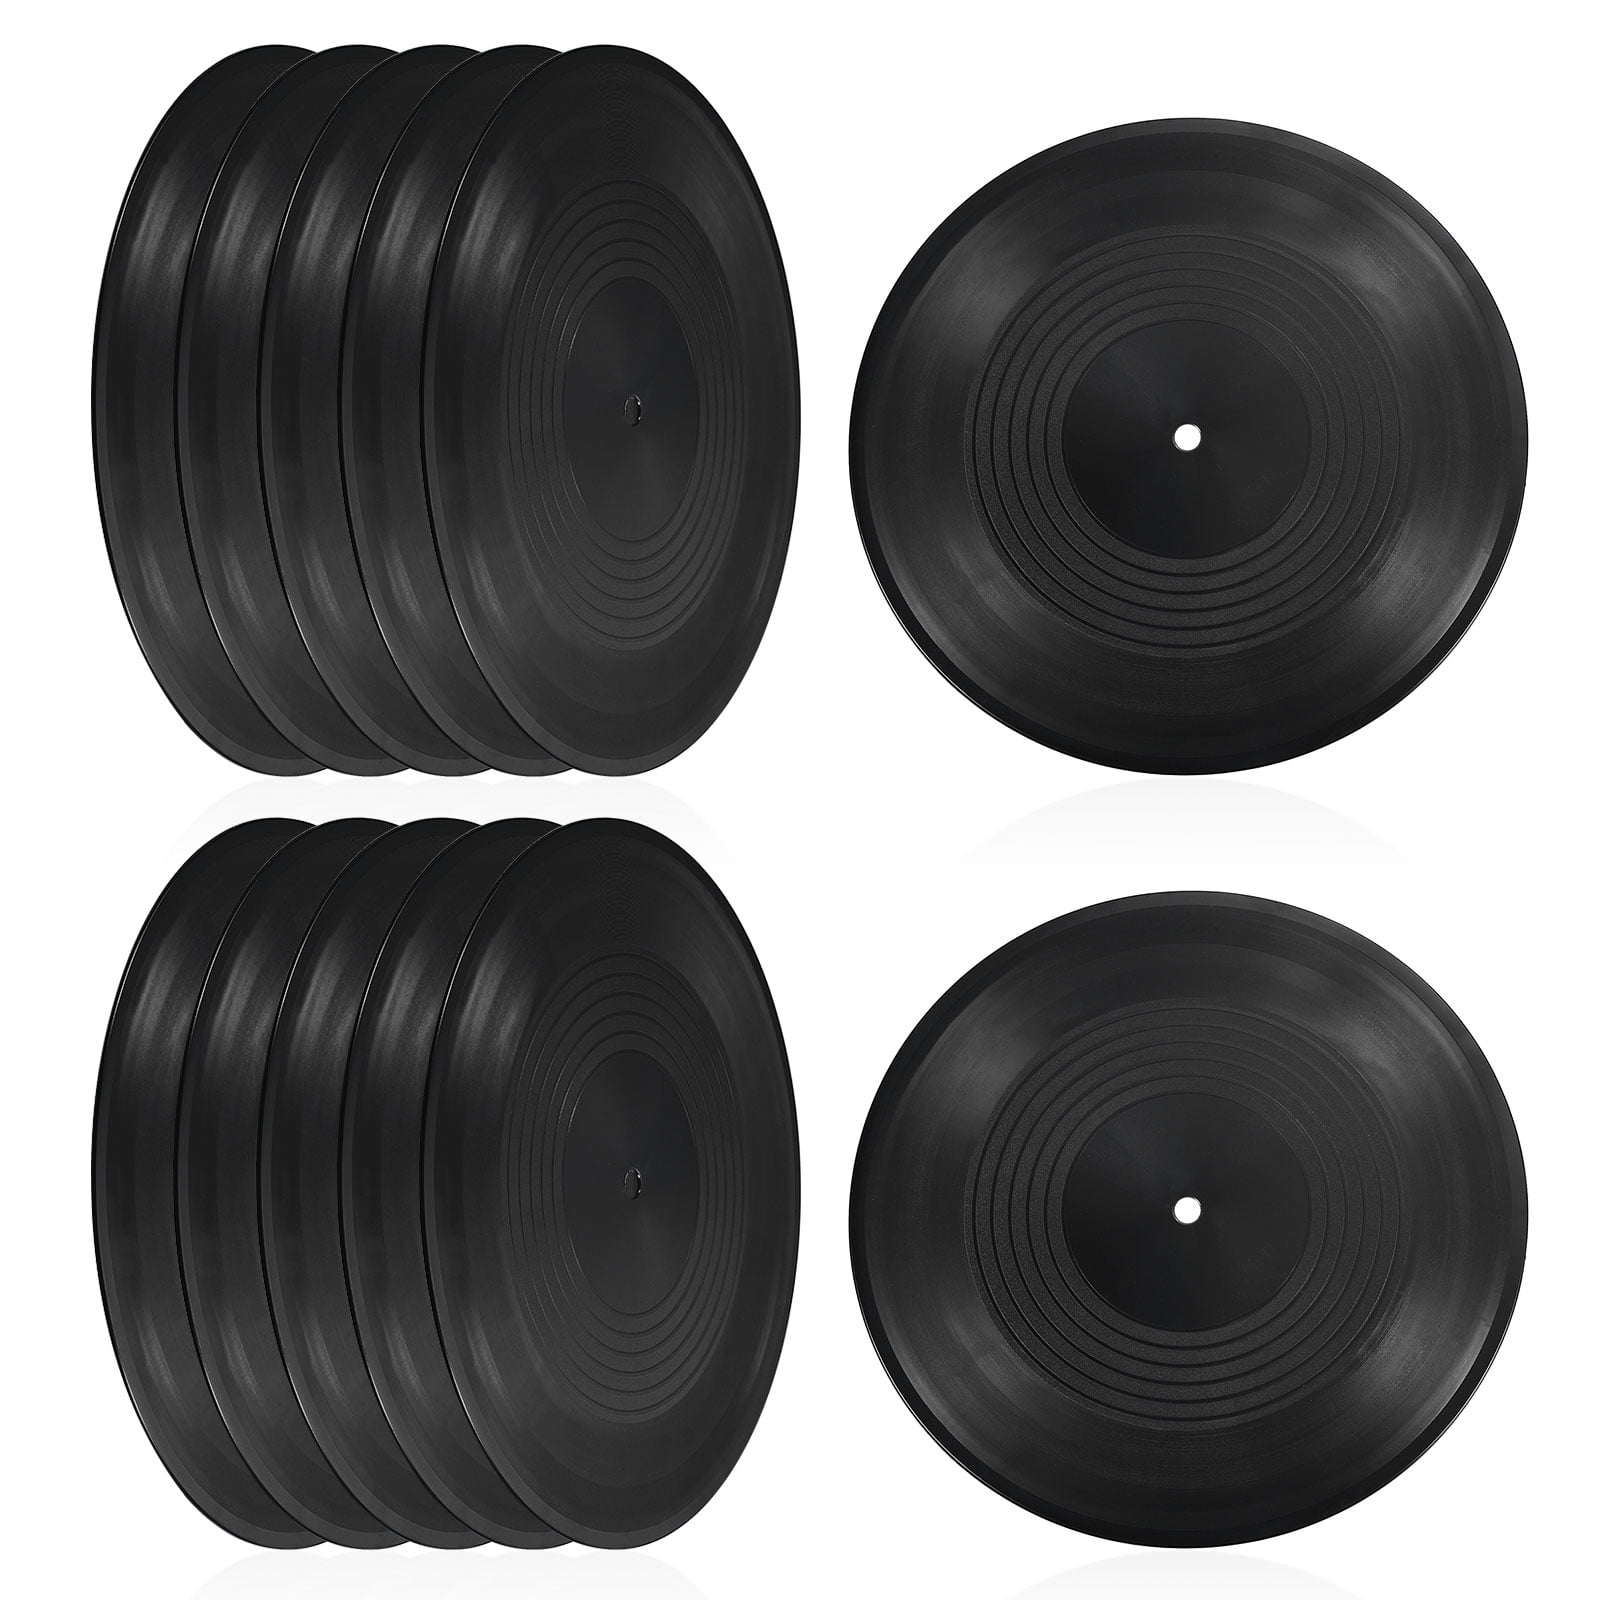 Uxcell Blank Vinyl Records Decor 12inch CD Fake Vinyl Records for Wall  Aesthetic 15 Pack 